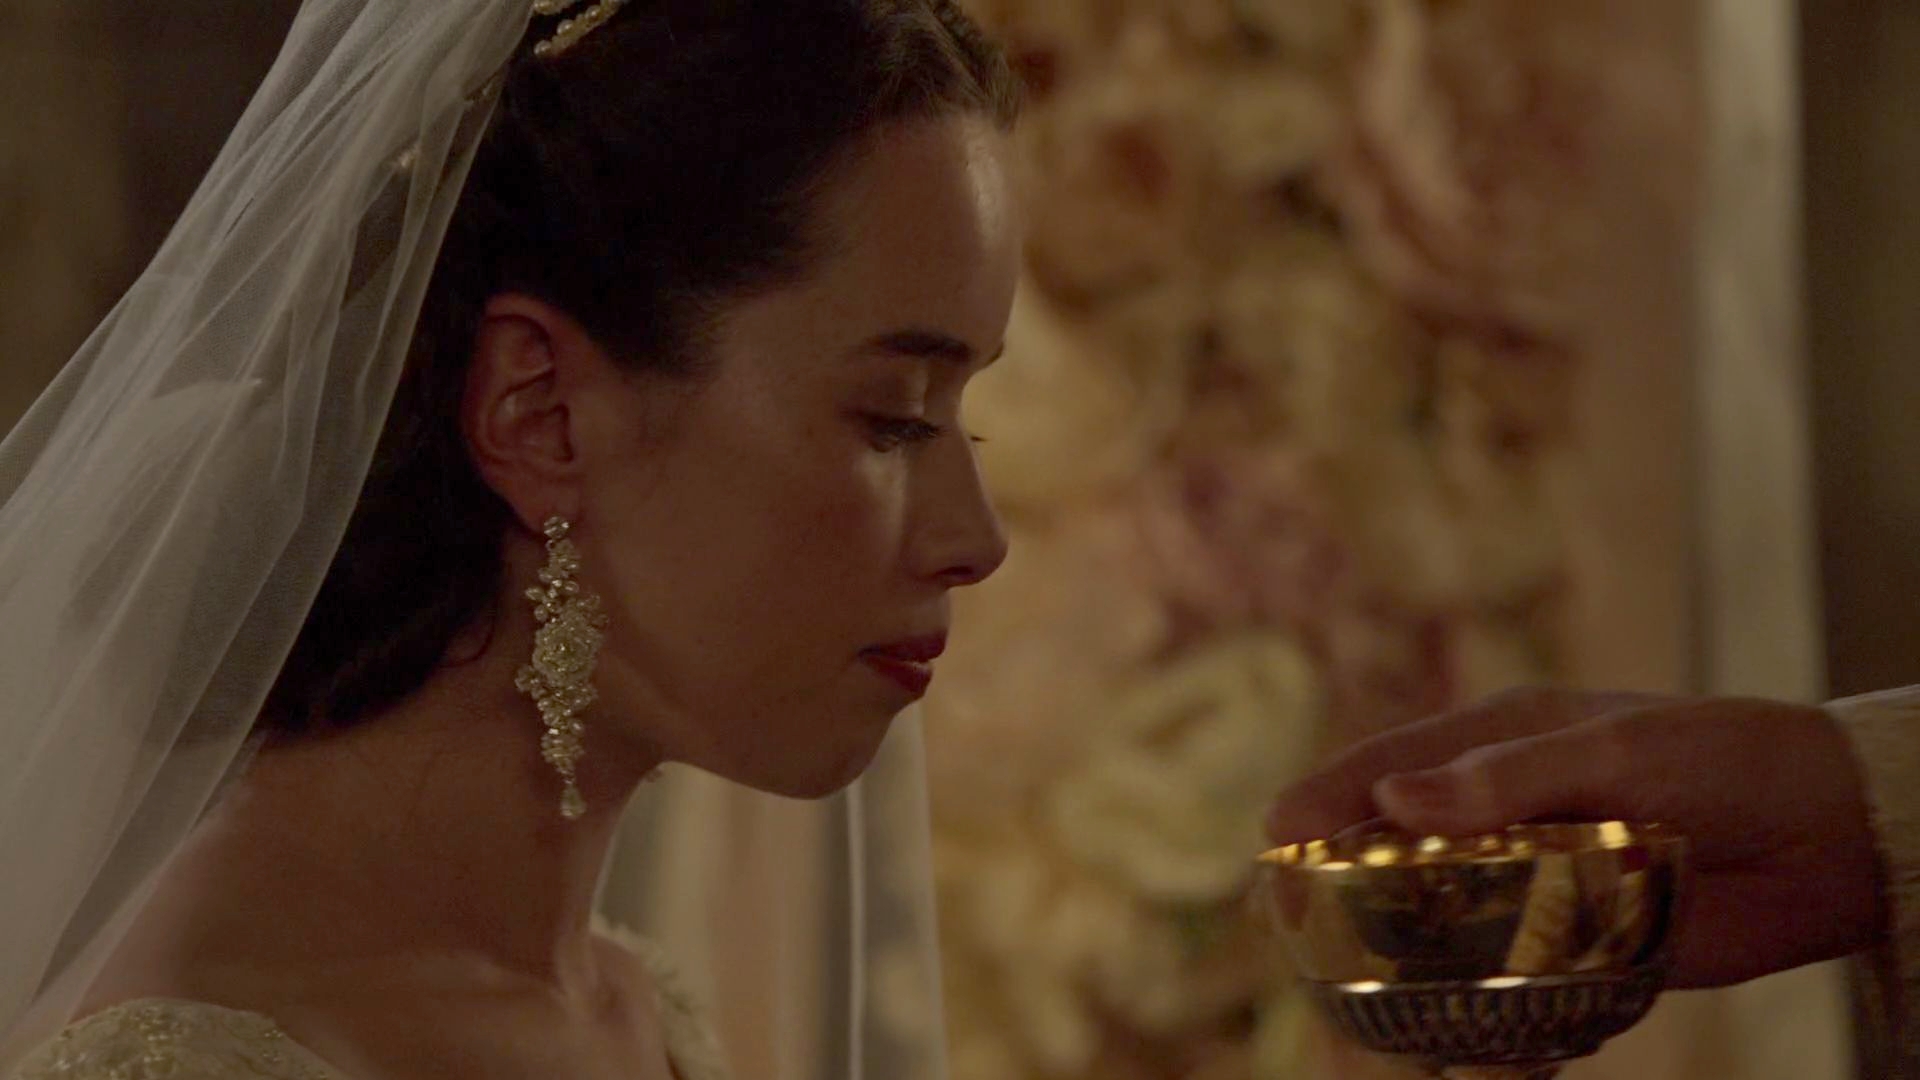  Actress Anna Popplewell wears an Edera 'Orange Blossom' crown and 'Delphinium' earrings on CW Channel's Reign.&nbsp; 